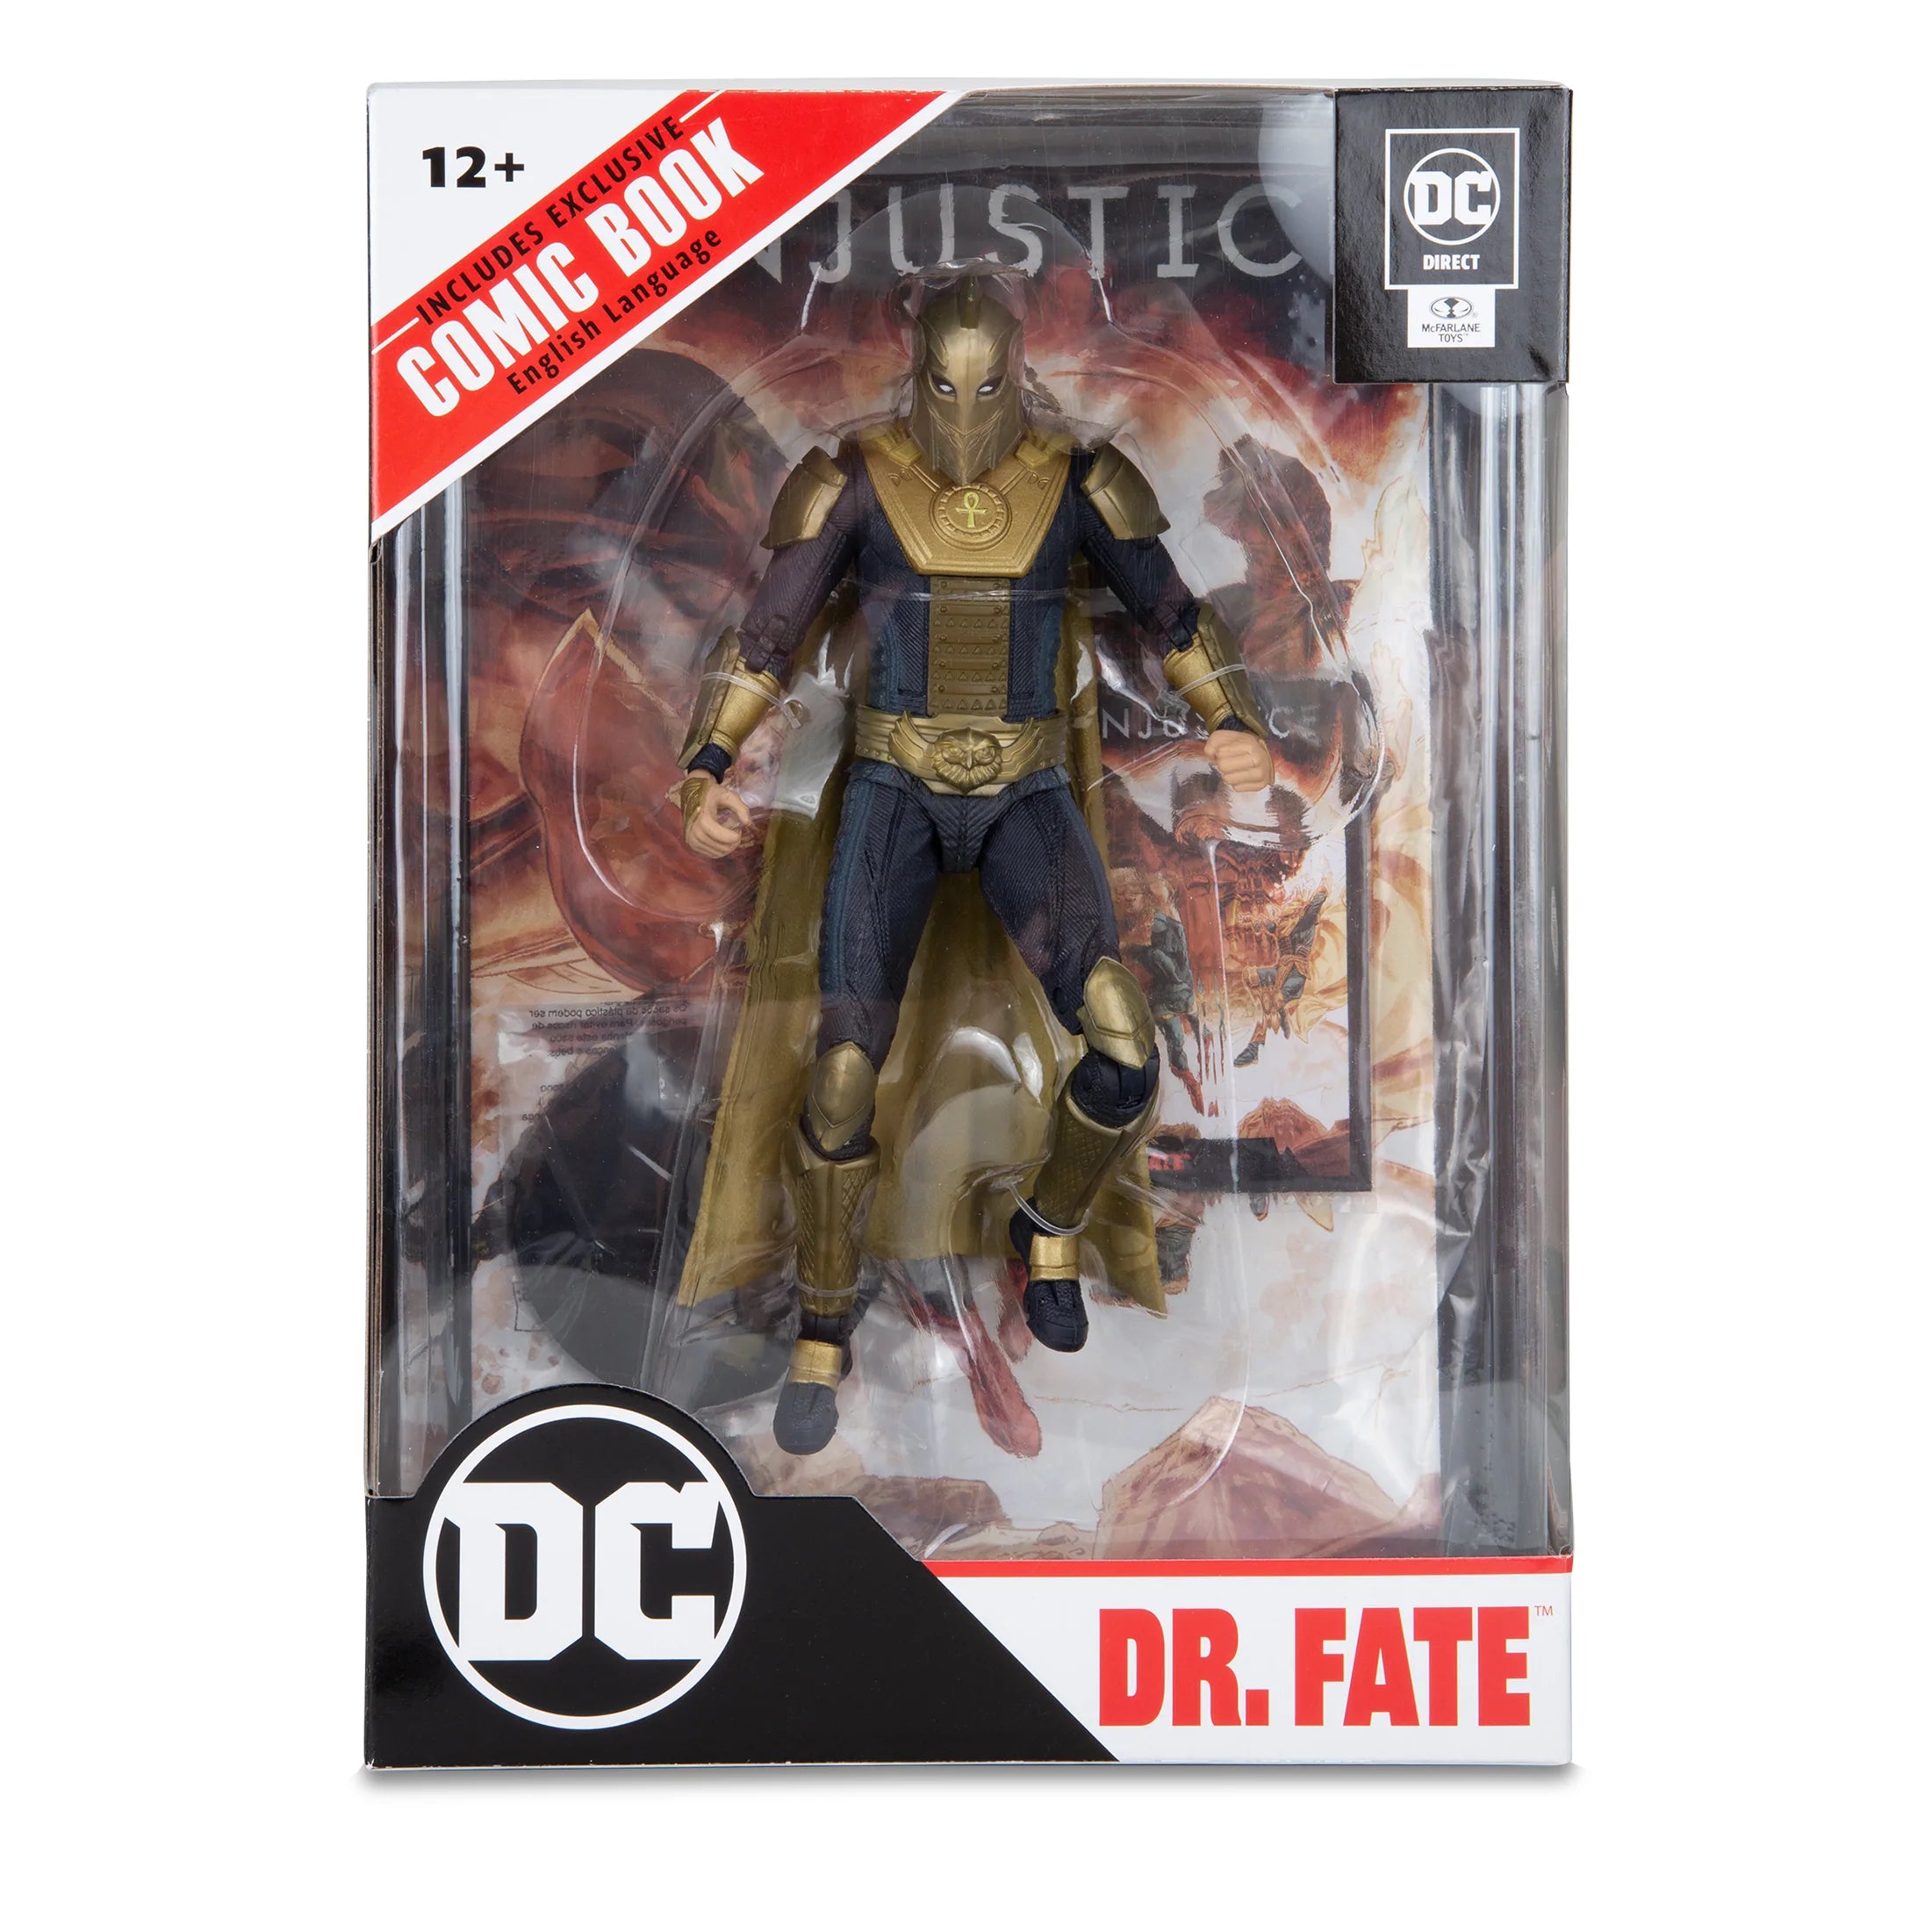 McFarlane DC Direct Page Punchers: DC Gaming Injustice 2 - Dr Fate 7 Pulgadas con Comic